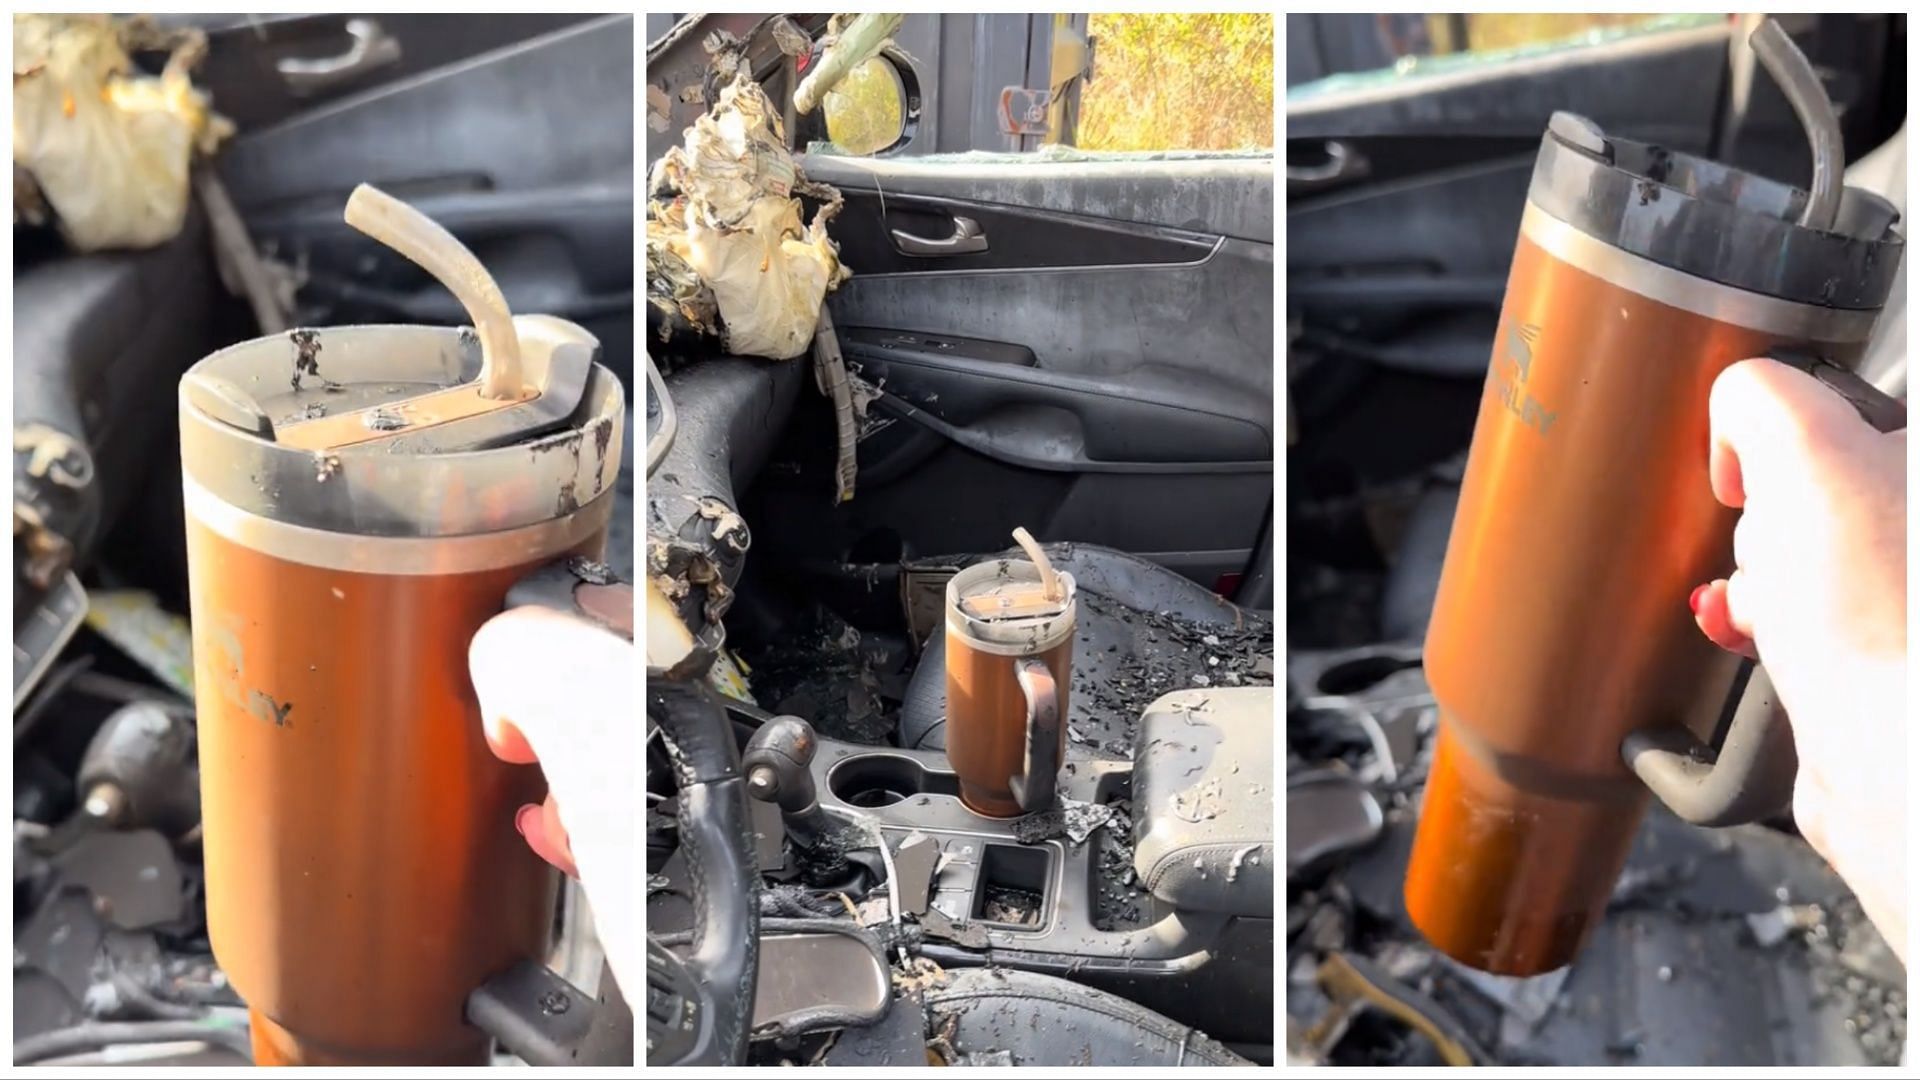 Stanley company offers woman free car replacement after viral video shows the cup undamaged in car fire (Image via TikTok/@danimarielttering)